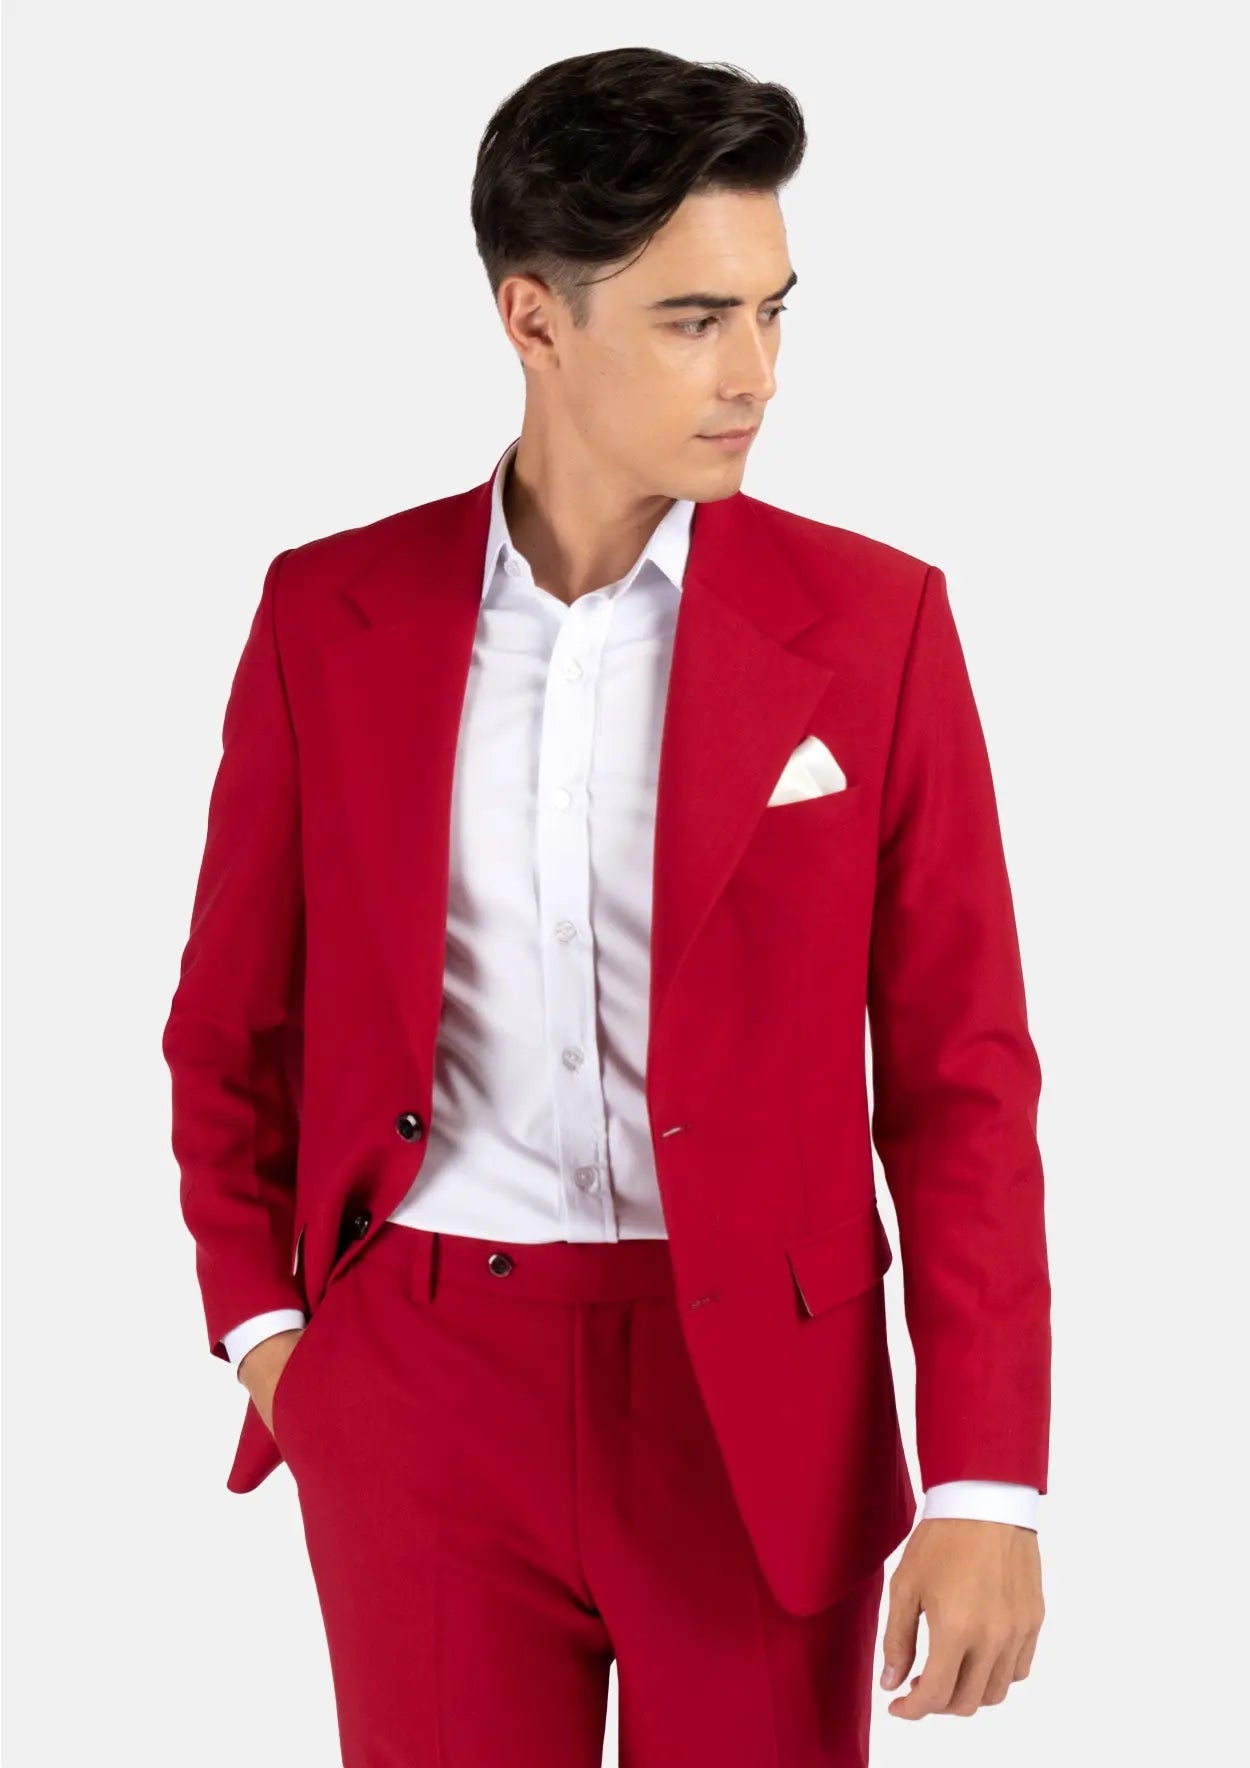 BIG & TALL Men's Red 2 Button Classic Fit Poplin Polyester Suit NWT | eBay